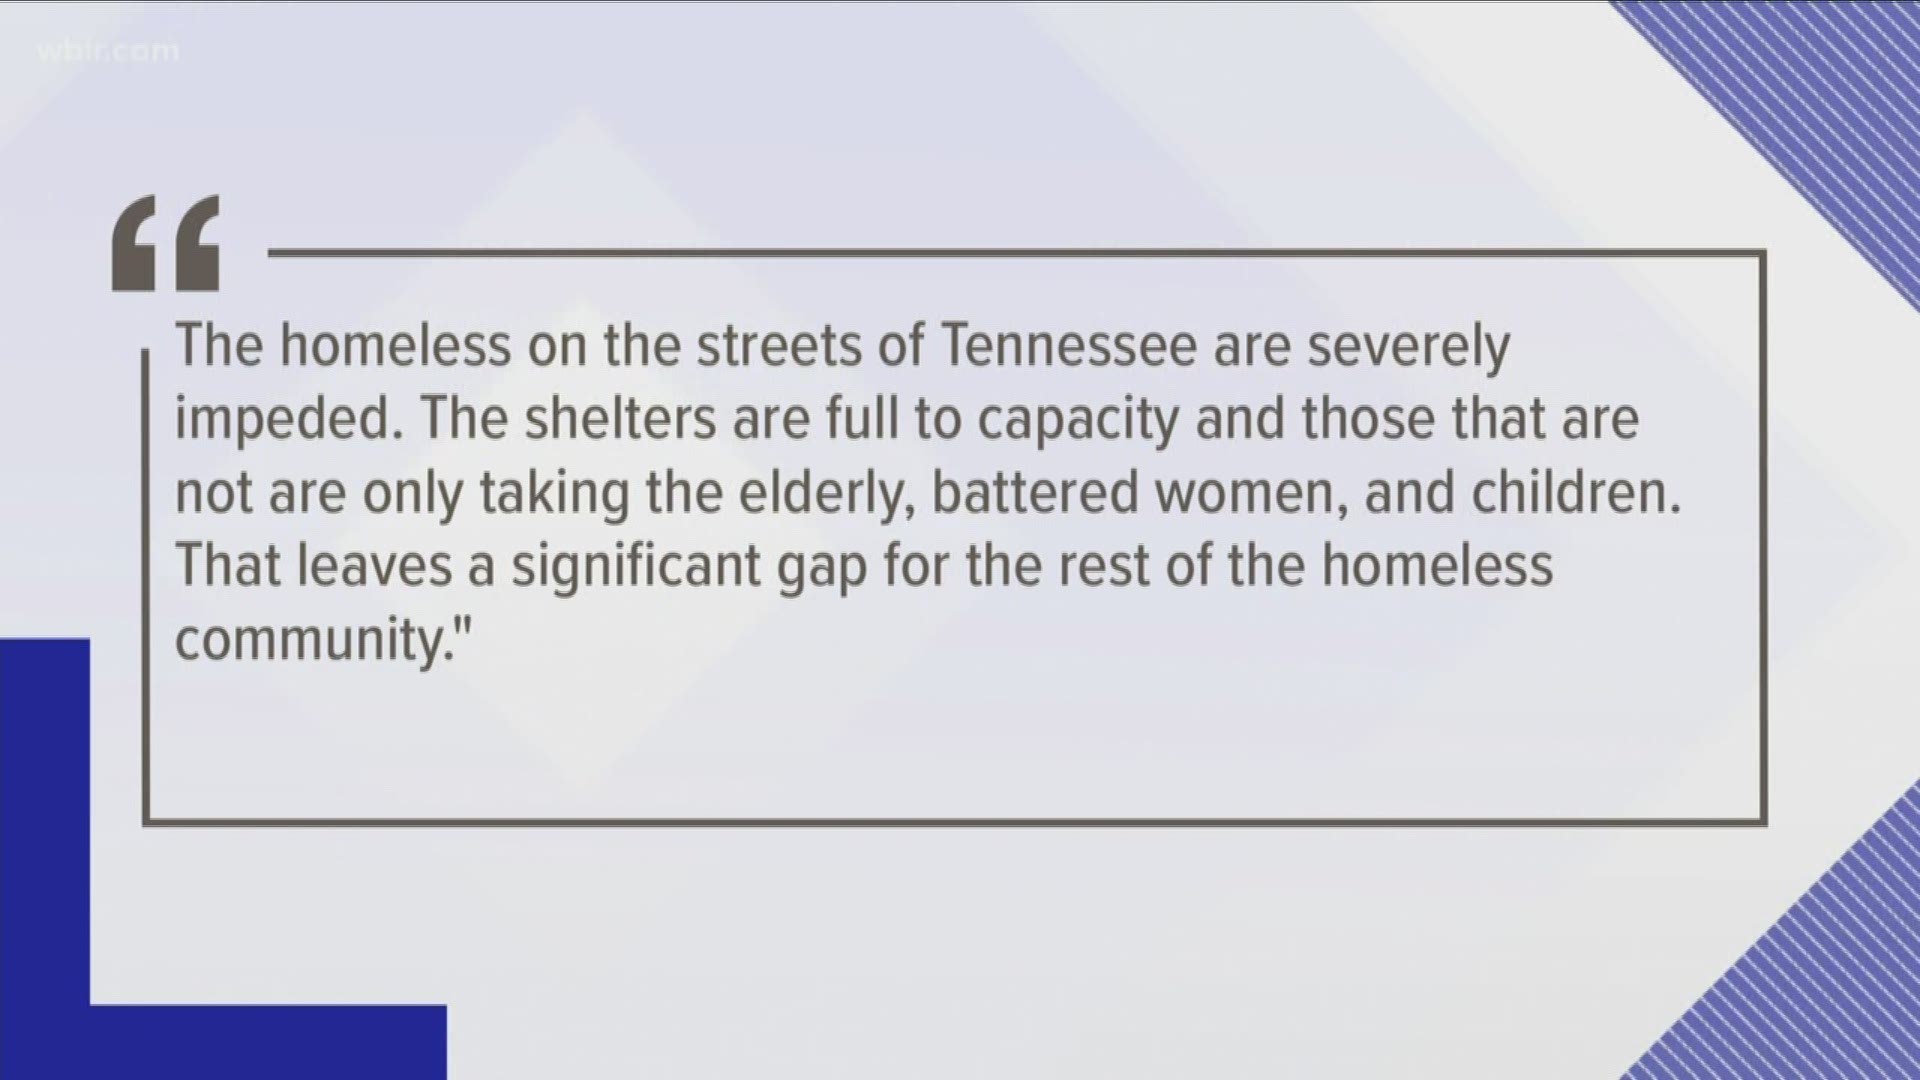 The homeless on the streets of Tennessee are severely impeded. The shelters are full to capacity.